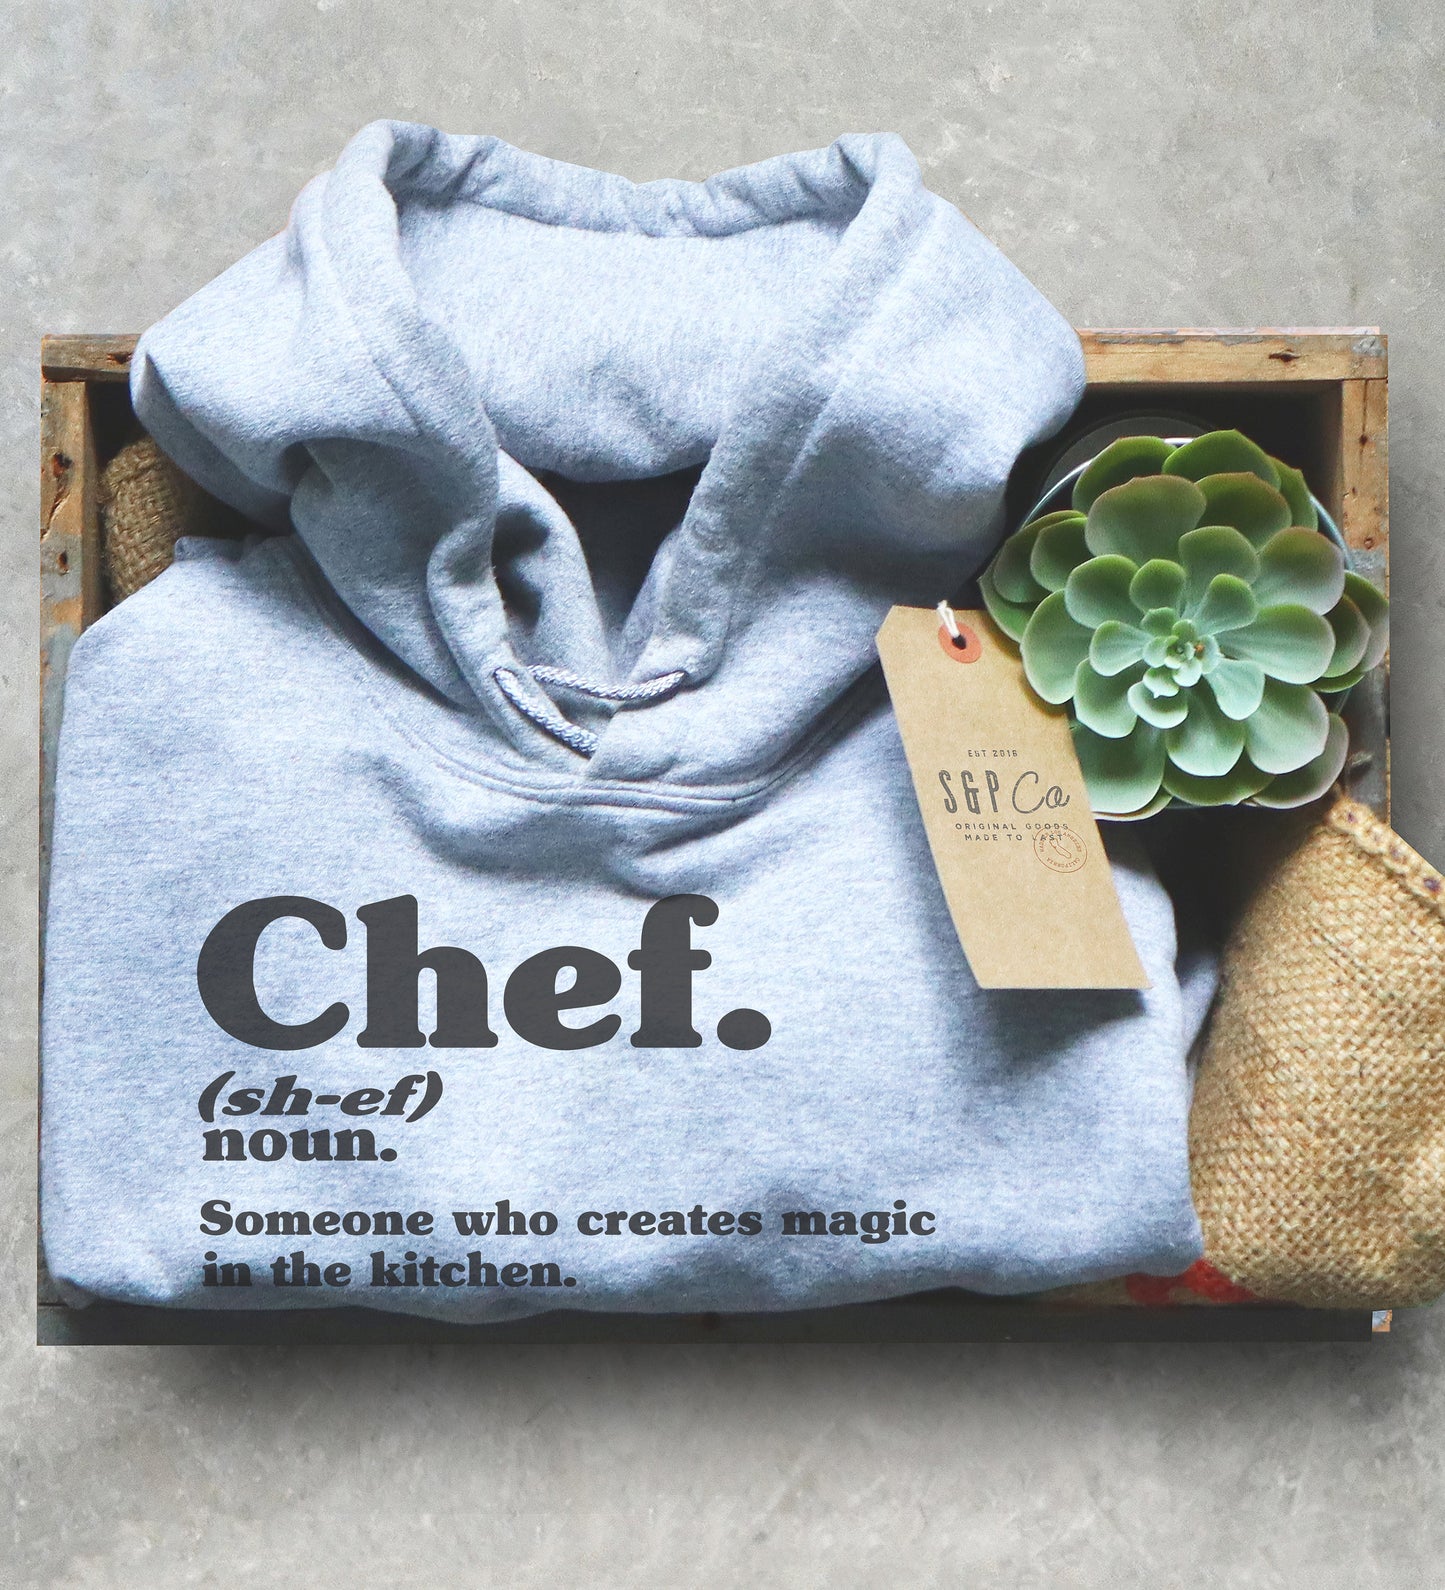 Chef Dictionary Definition Hoodie - Chef shirt, Chef gift, Cooking shirt, Foodie shirt, Cooking gift, Culinary gifts, Food shirt, Sous chef